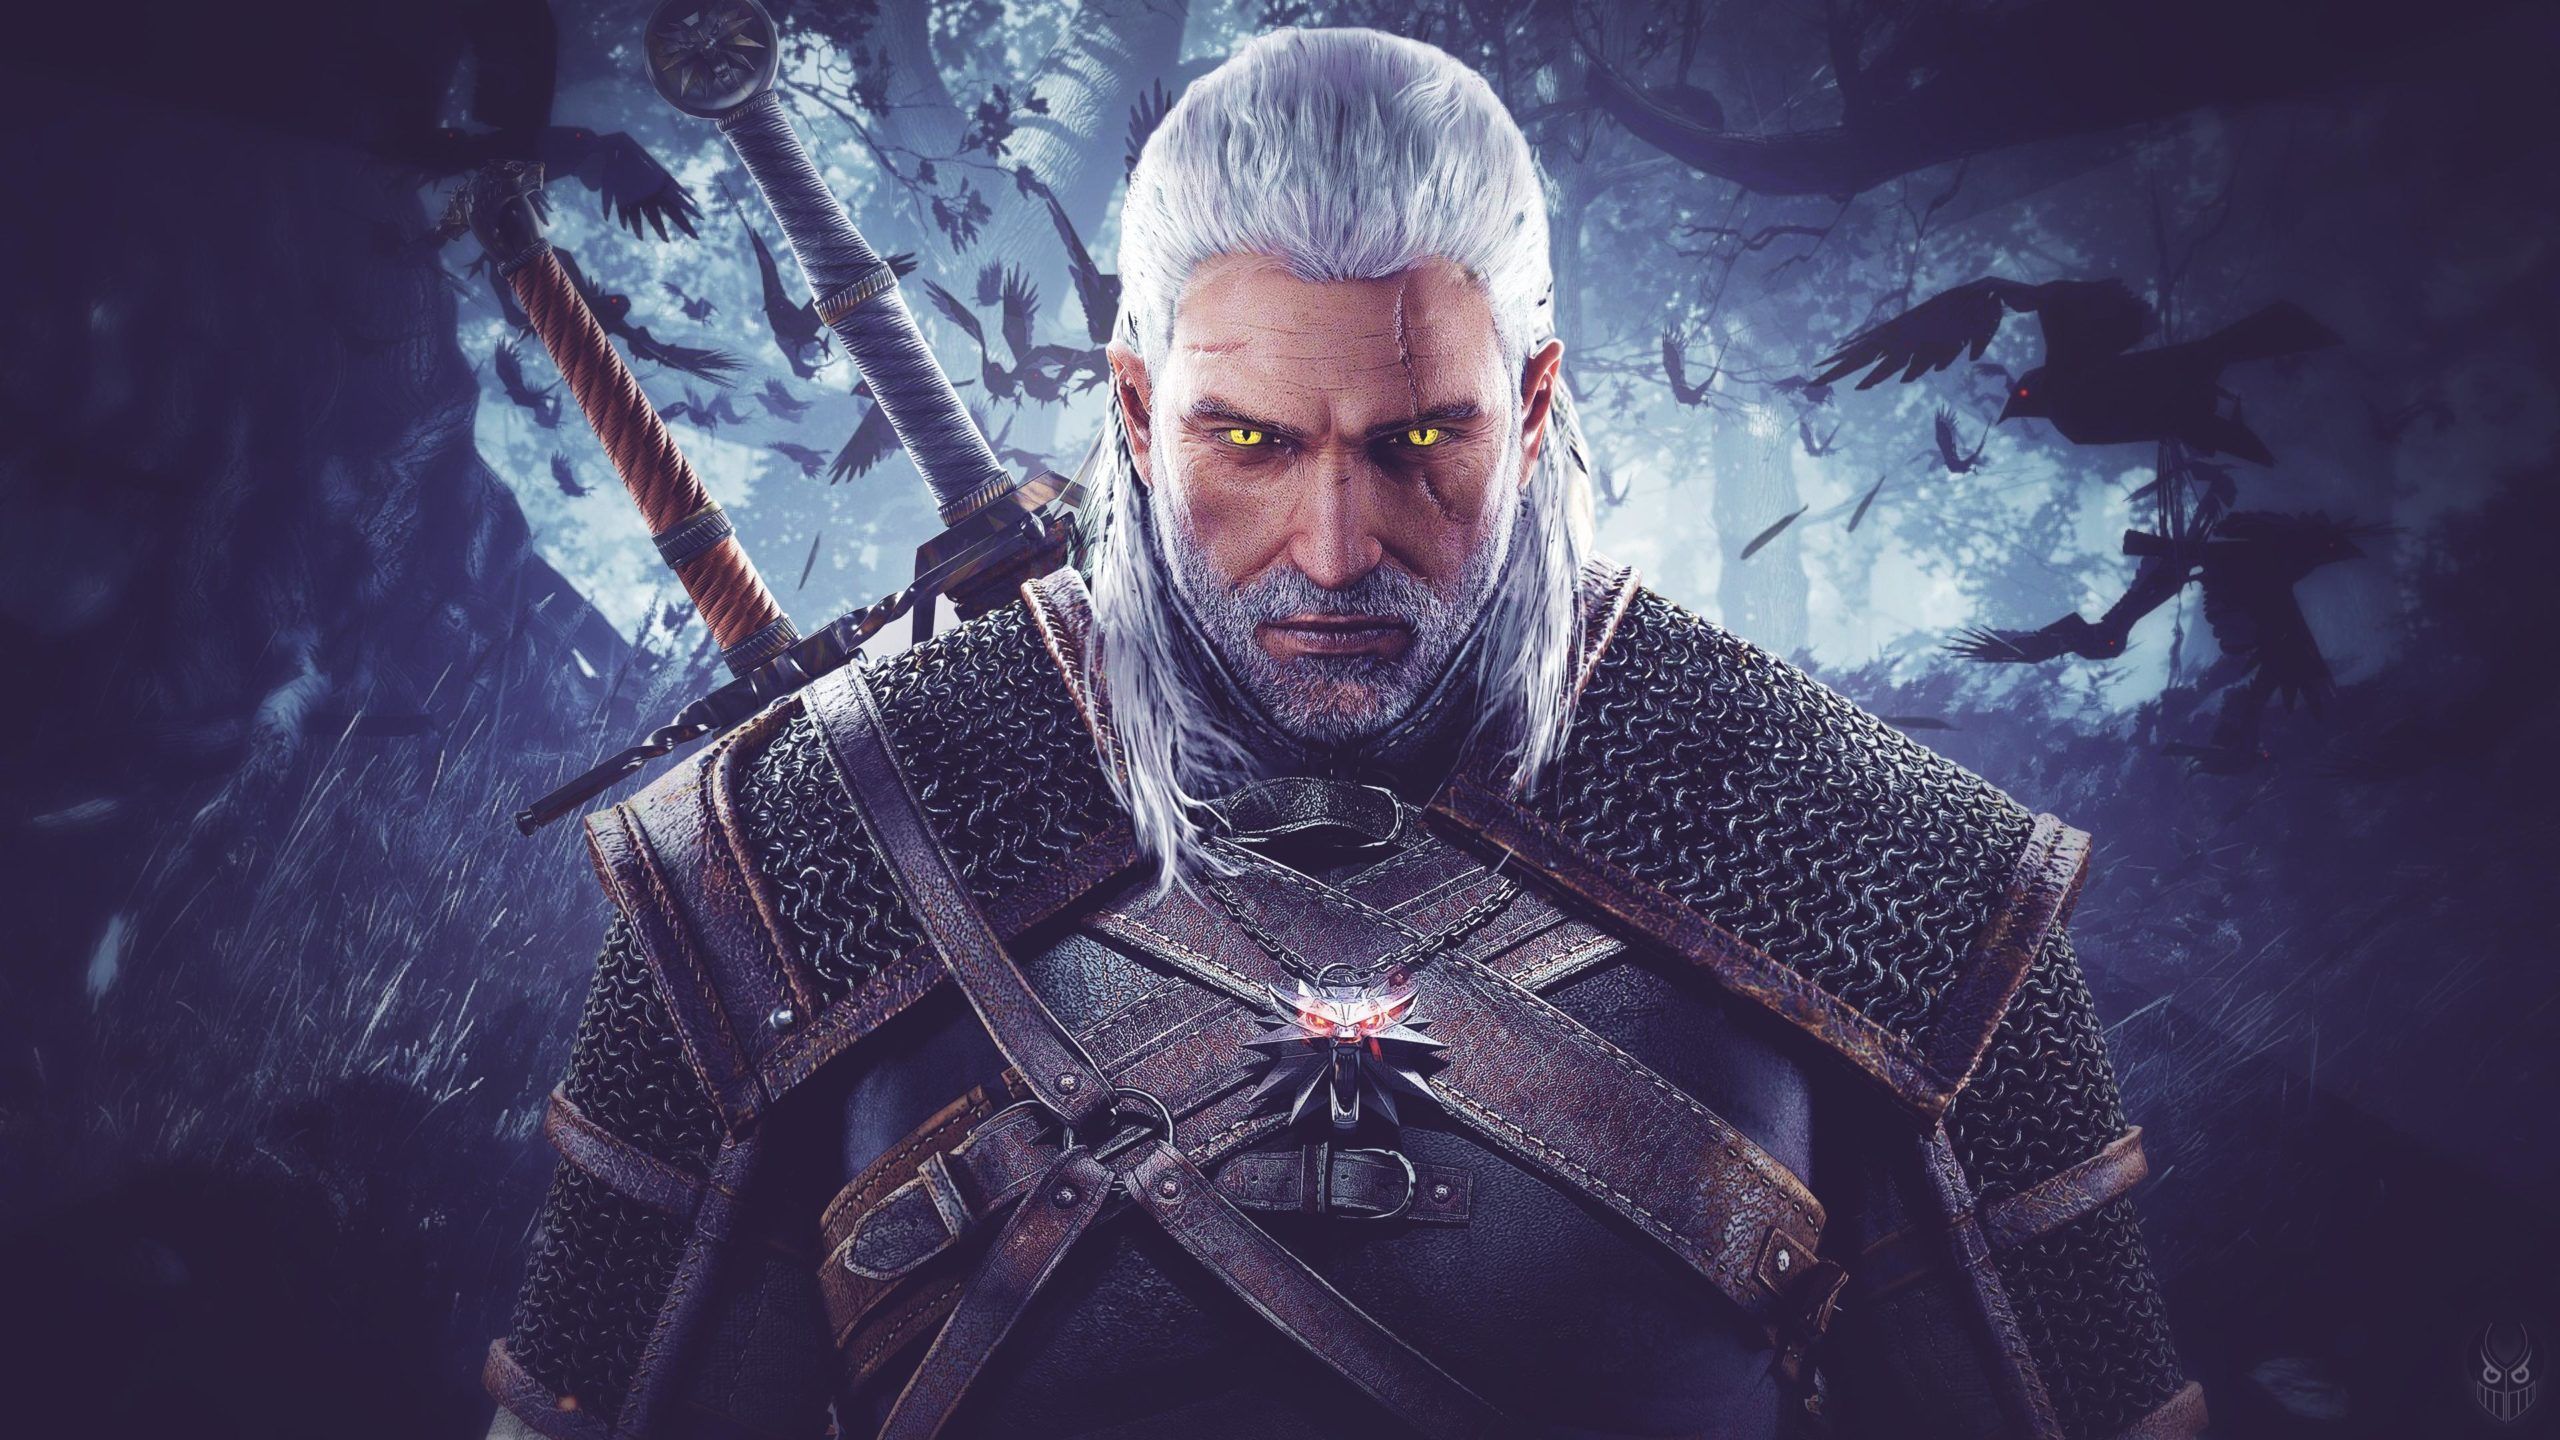 4k Witcher Wallpaper Desktop, Android and iPhone